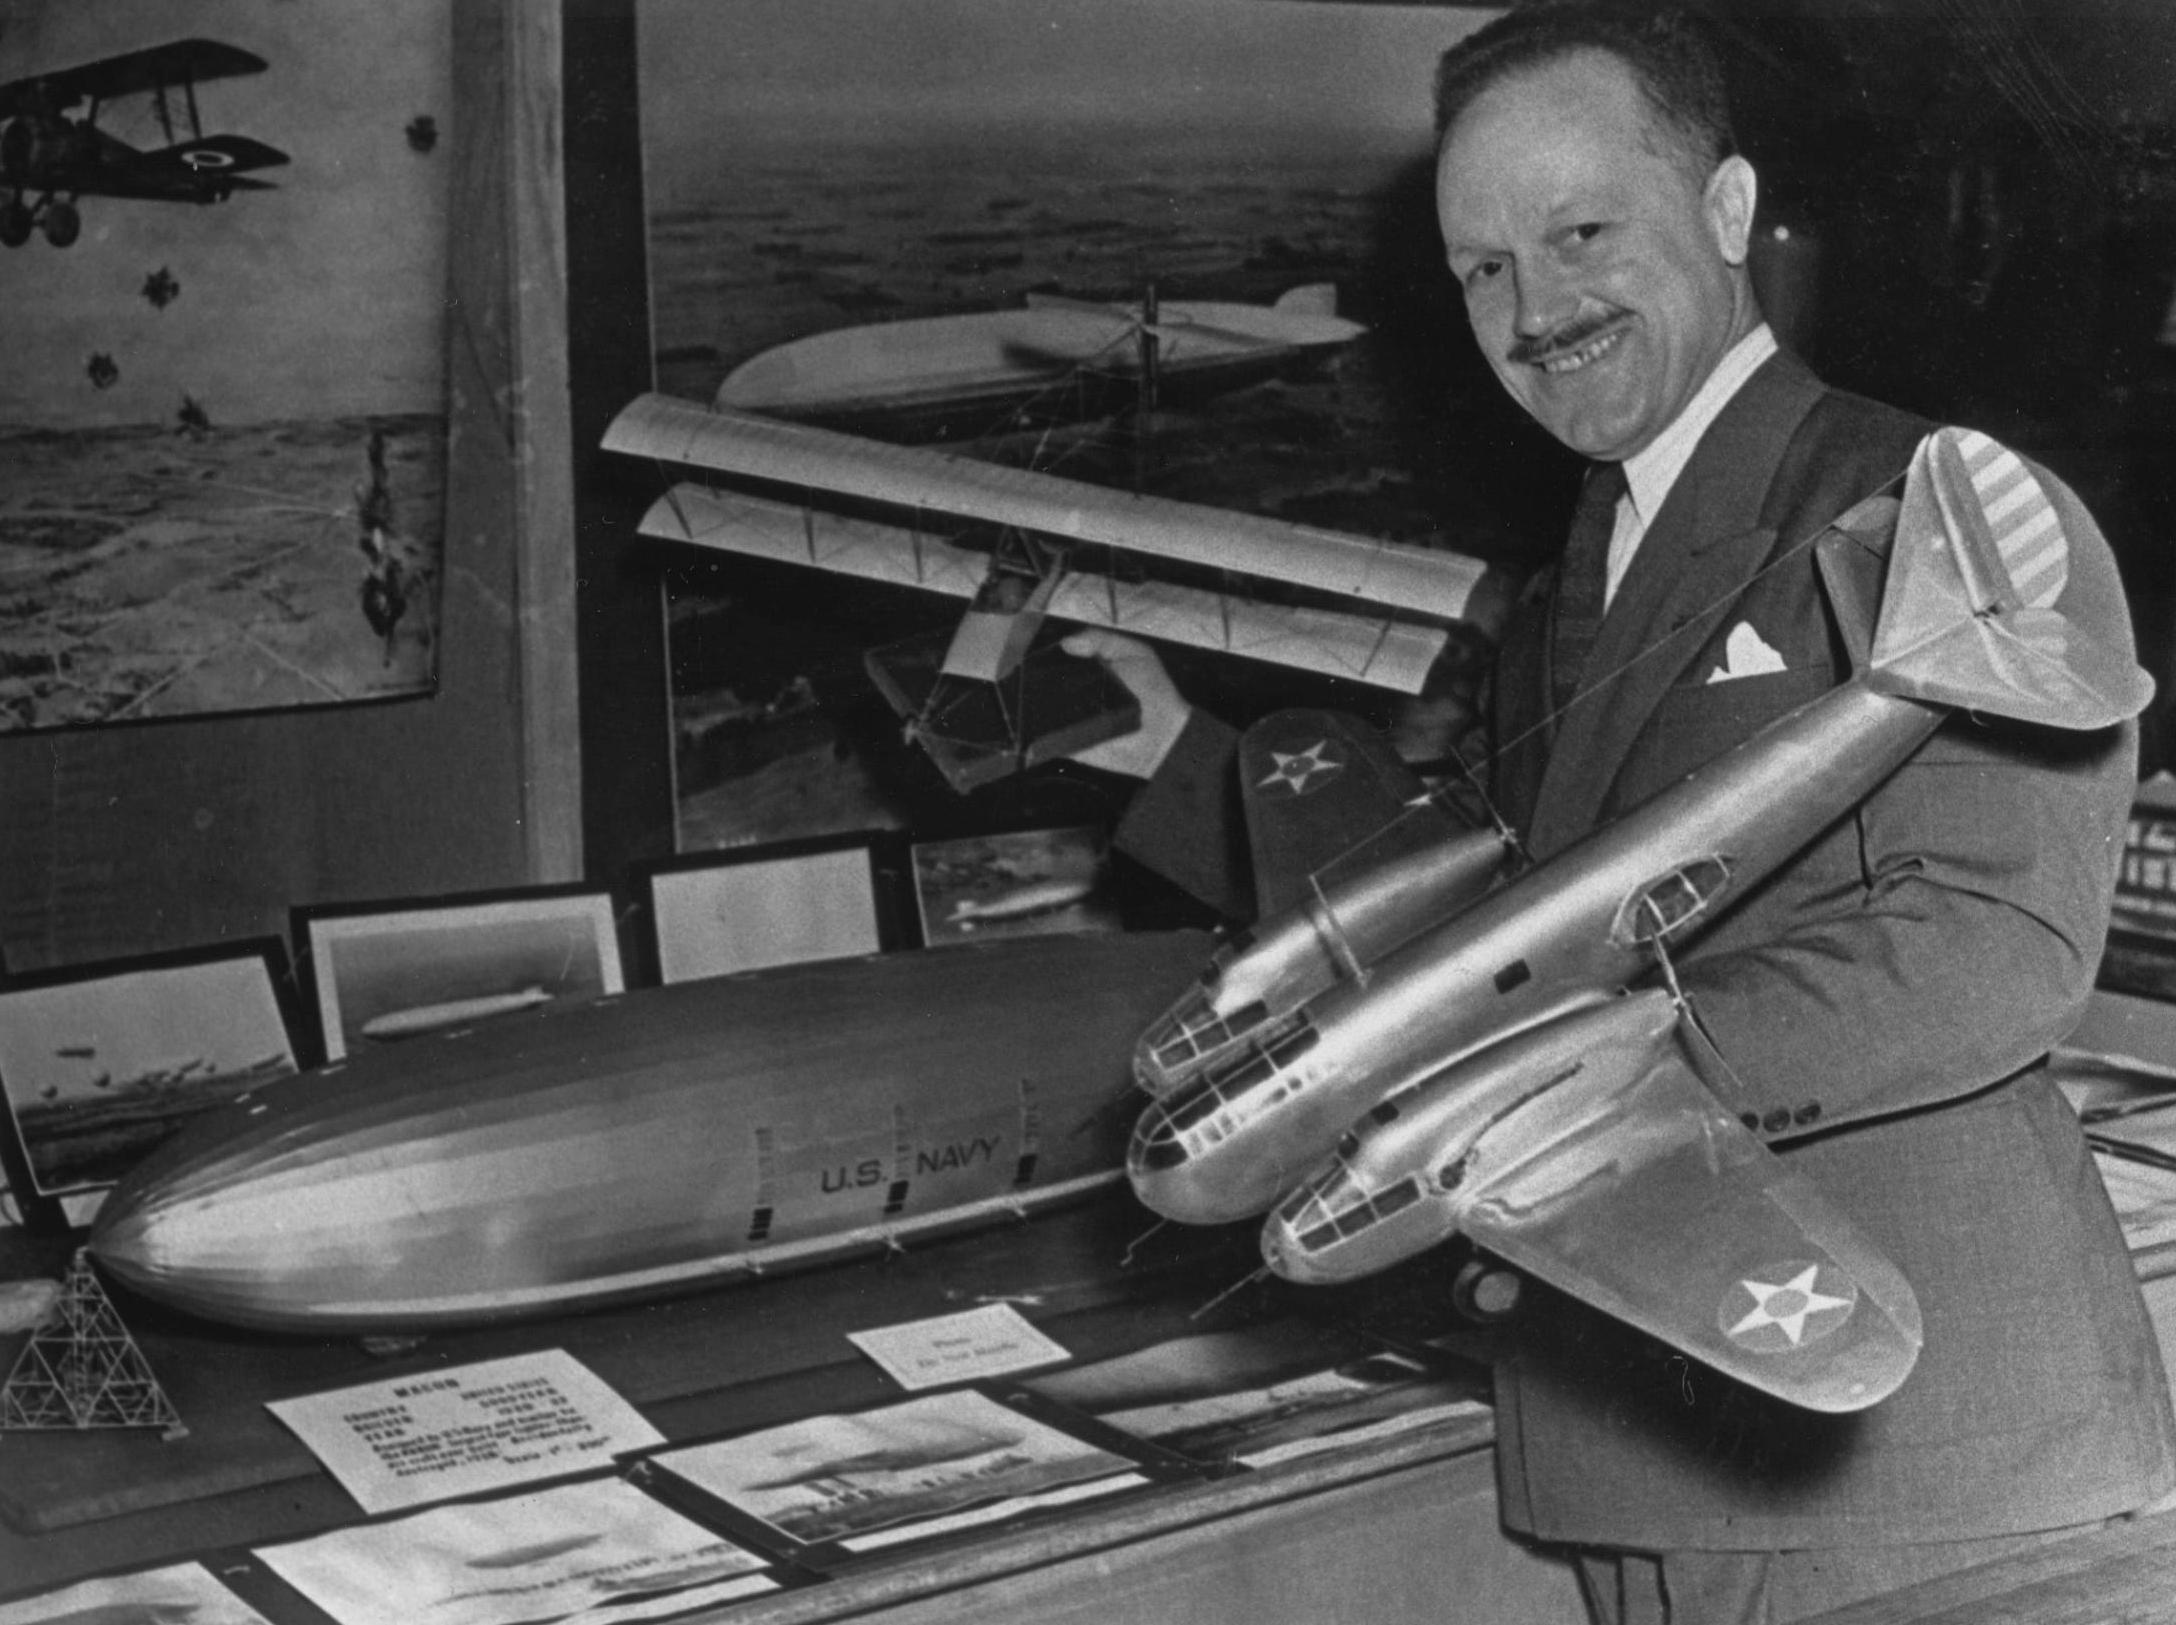 Cook holds a model plane in each hand. 